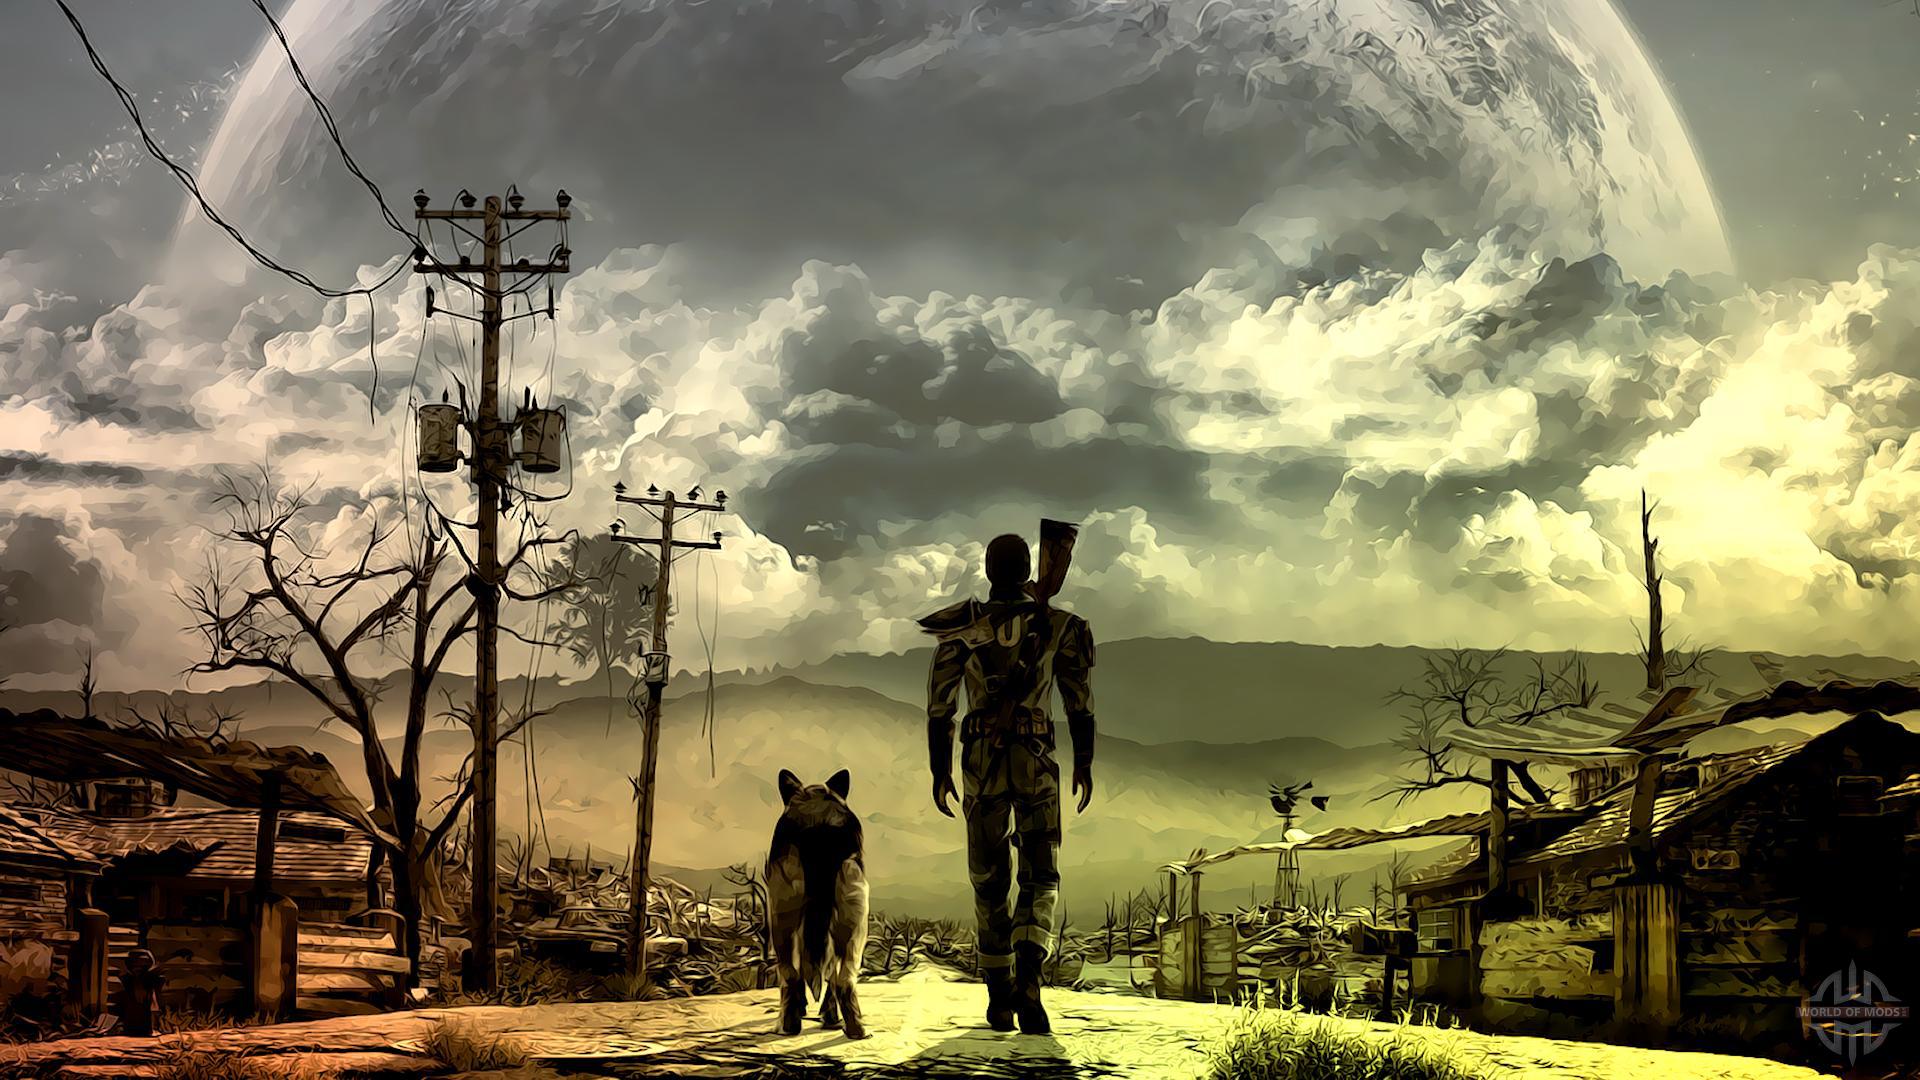 HQ Fallout Wallpapers | File 298.28Kb